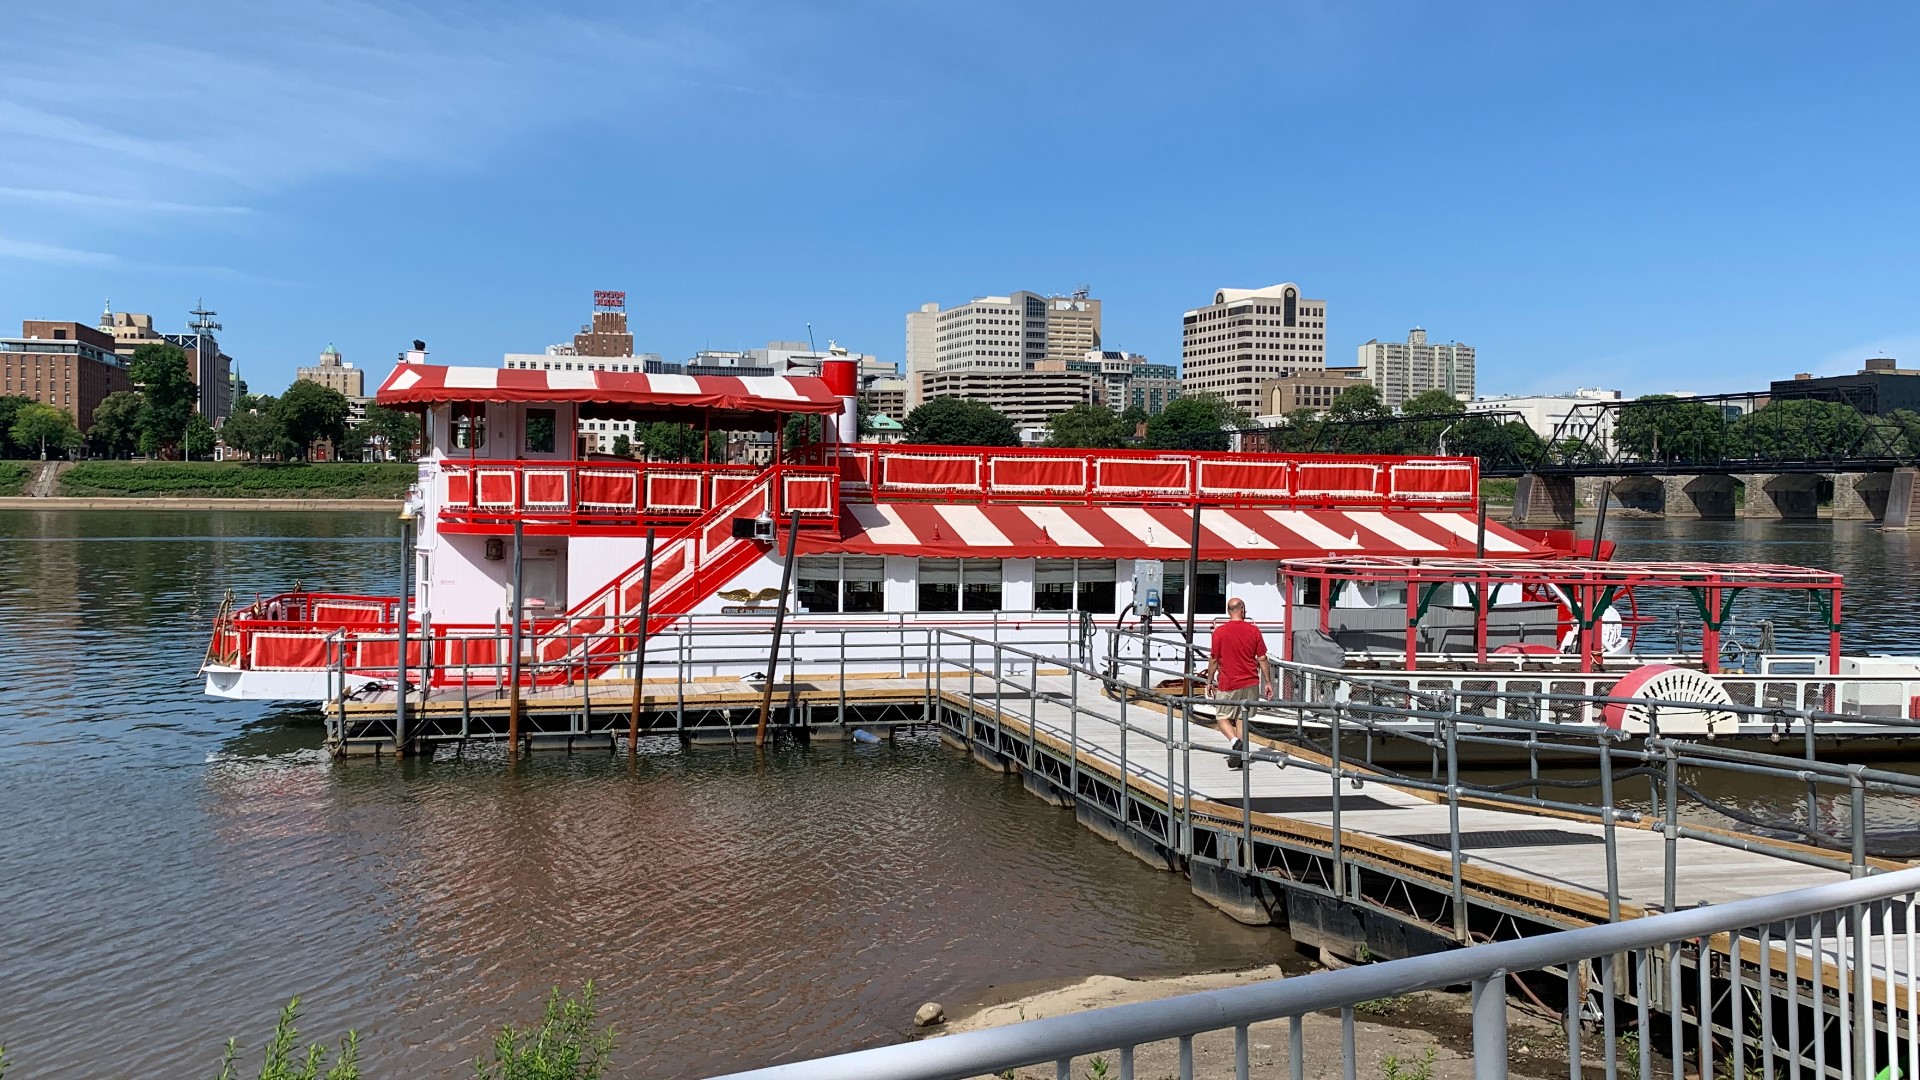 The famous red and white riverboat will be hitting the Susquehanna for its 35th year.